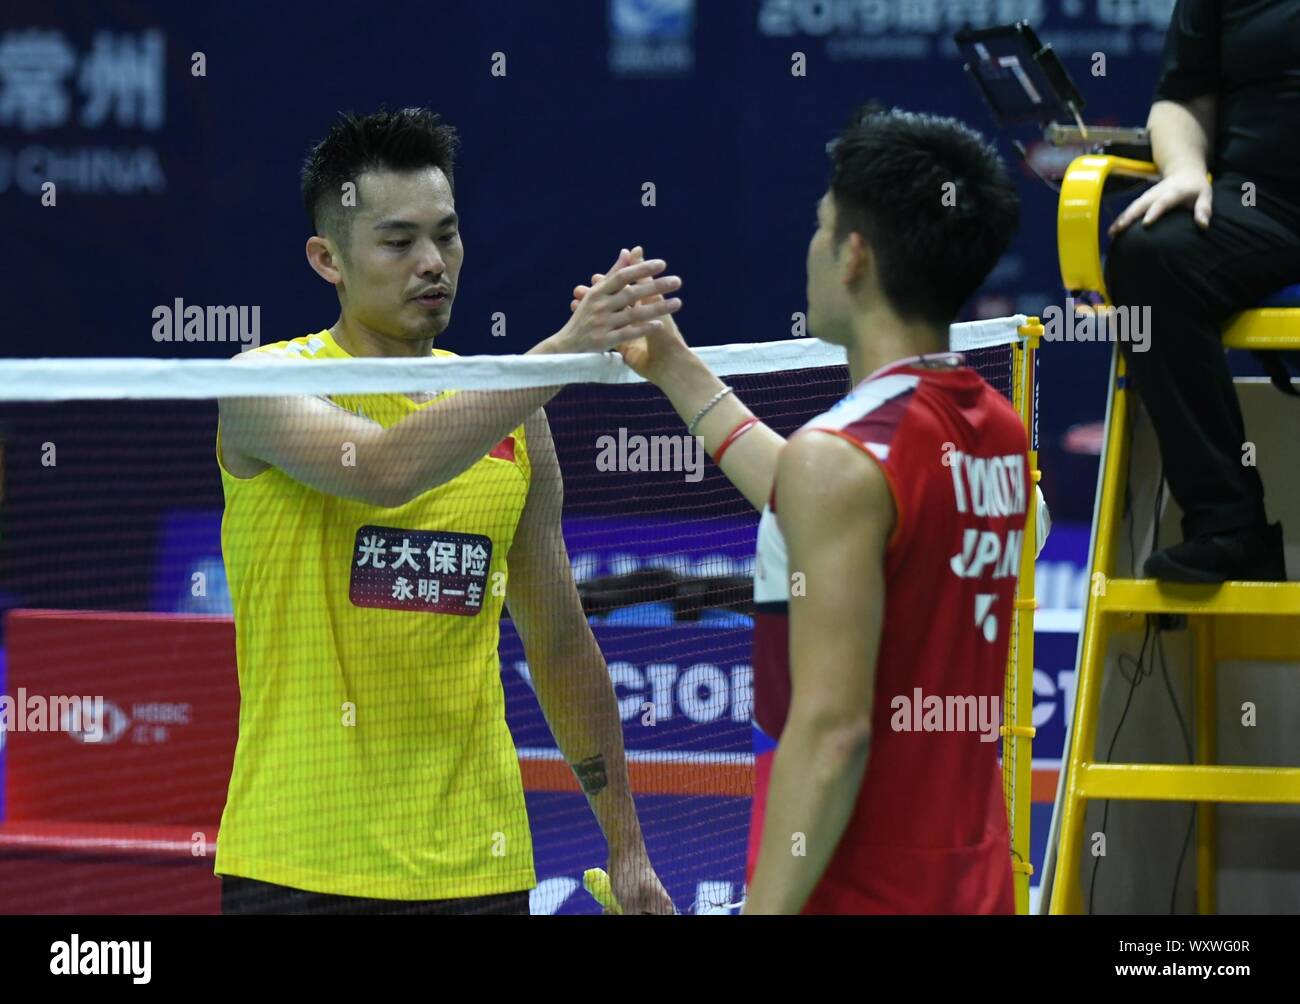 Chinese professional badminton player Lin Dan, left, competes against Japanese professional badminton player Kento Momota, right, at the first round of men's single of VICTOR China Open 2019, in Changzhou city, east China's Jiangsu province, 17 September 2019. Chinese professional badminton player Lin Dan was defeated by Japanese professional badminton player Kento Momota with 0-2 at the first round of men's single of VICTOR China Open 2019, in Changzhou city, east China's Jiangsu province, 17 September 2019. Stock Photo